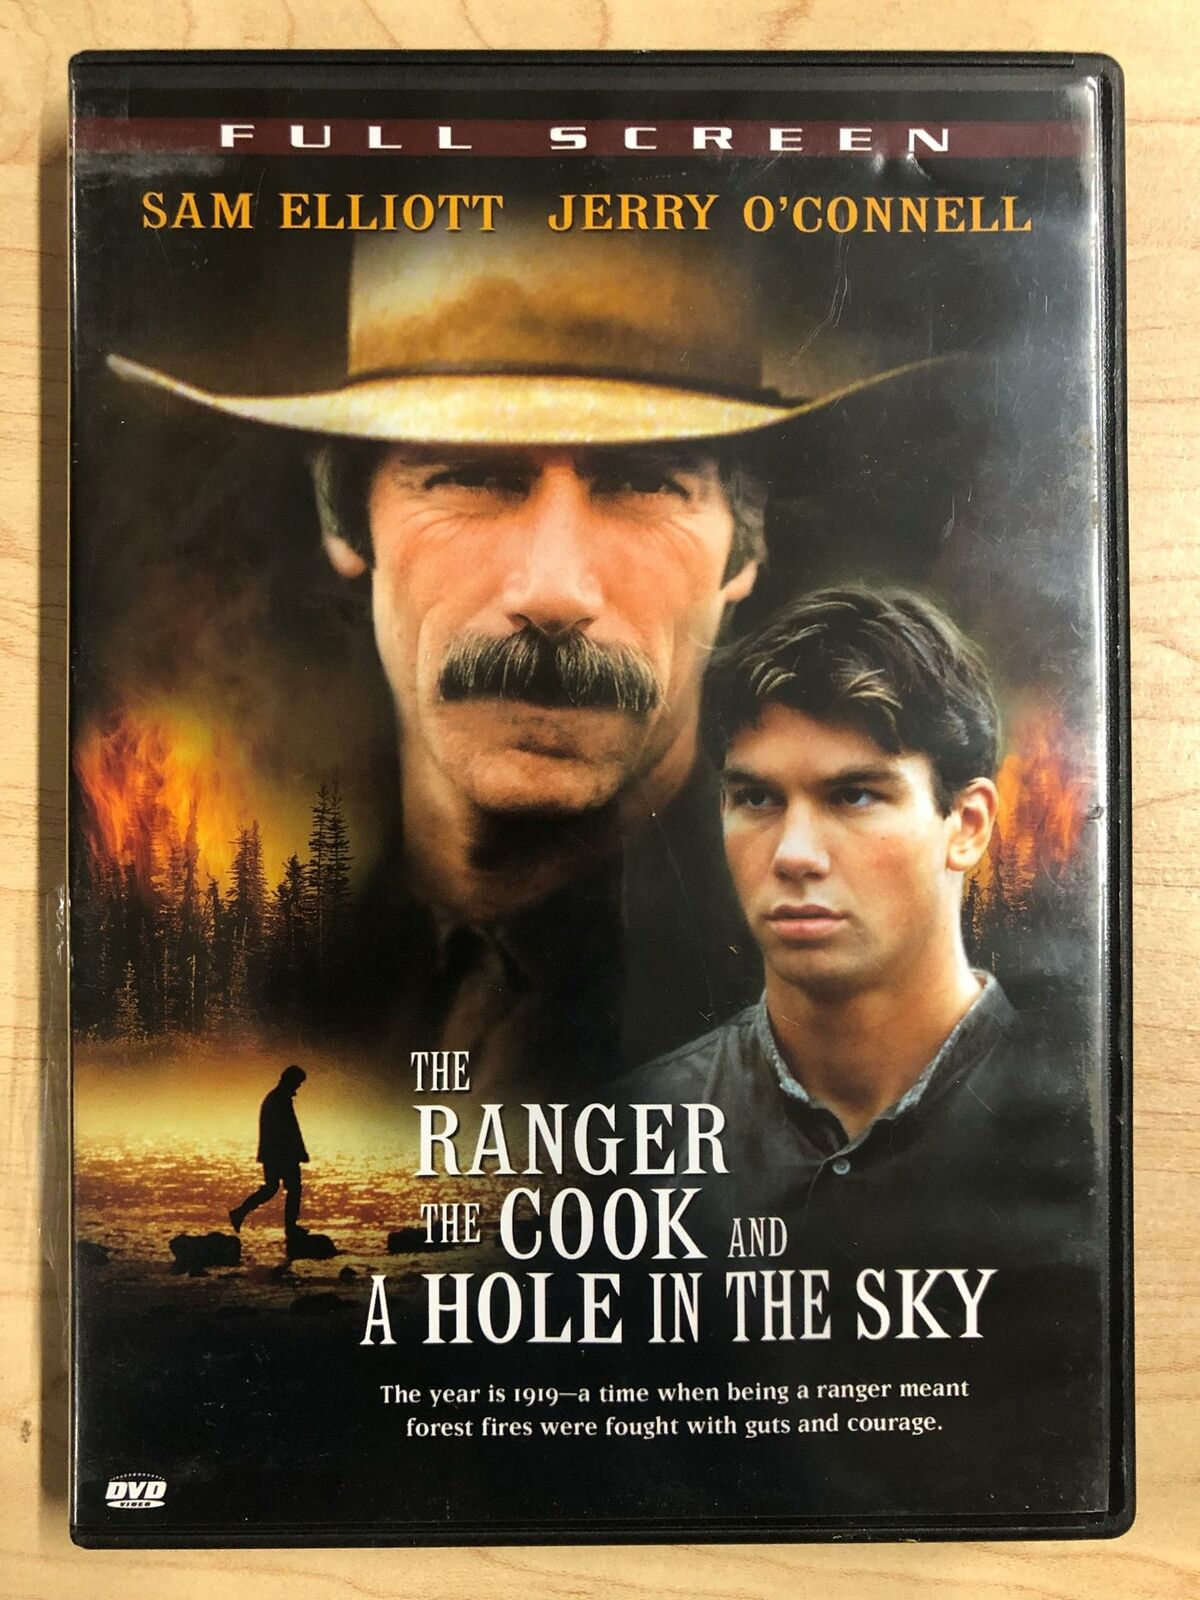 The Ranger, the Cook and a Hole in the Sky (DVD, full screen, 1995) - J0319